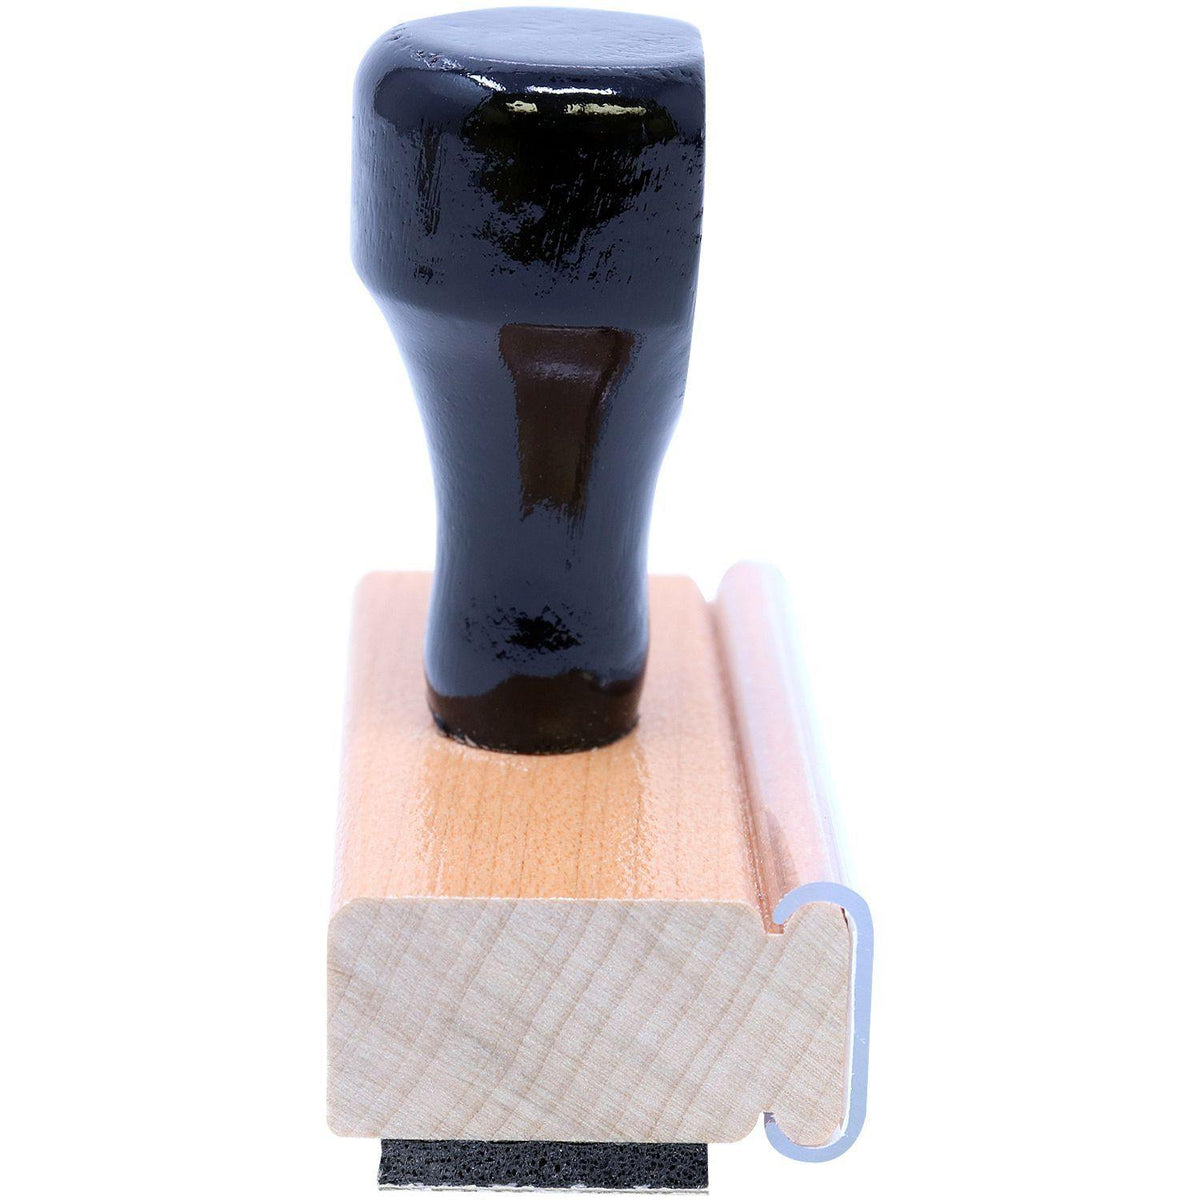 Lets review this with Lamp Rubber Stamp - Engineer Seal Stamps - Brand_Acorn, Impression Size_Small, Stamp Type_Regular Stamp, Type of Use_Teacher